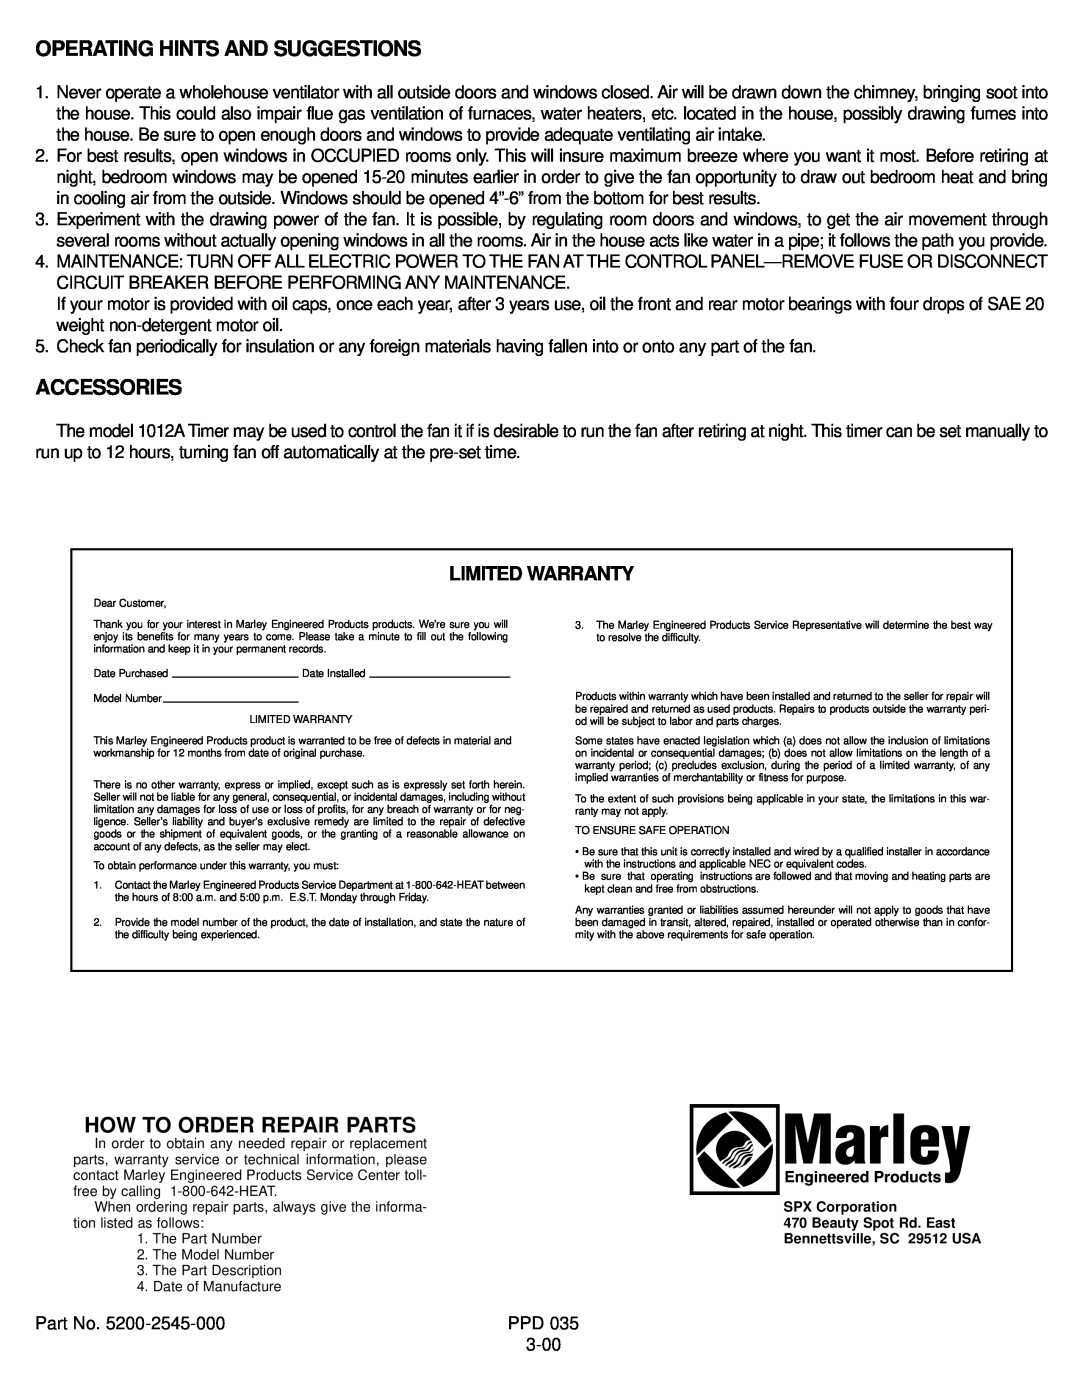 Marley Engineered Products A24DD Operating Hints And Suggestions, Accessories, How To Order Repair Parts, Limited Warranty 